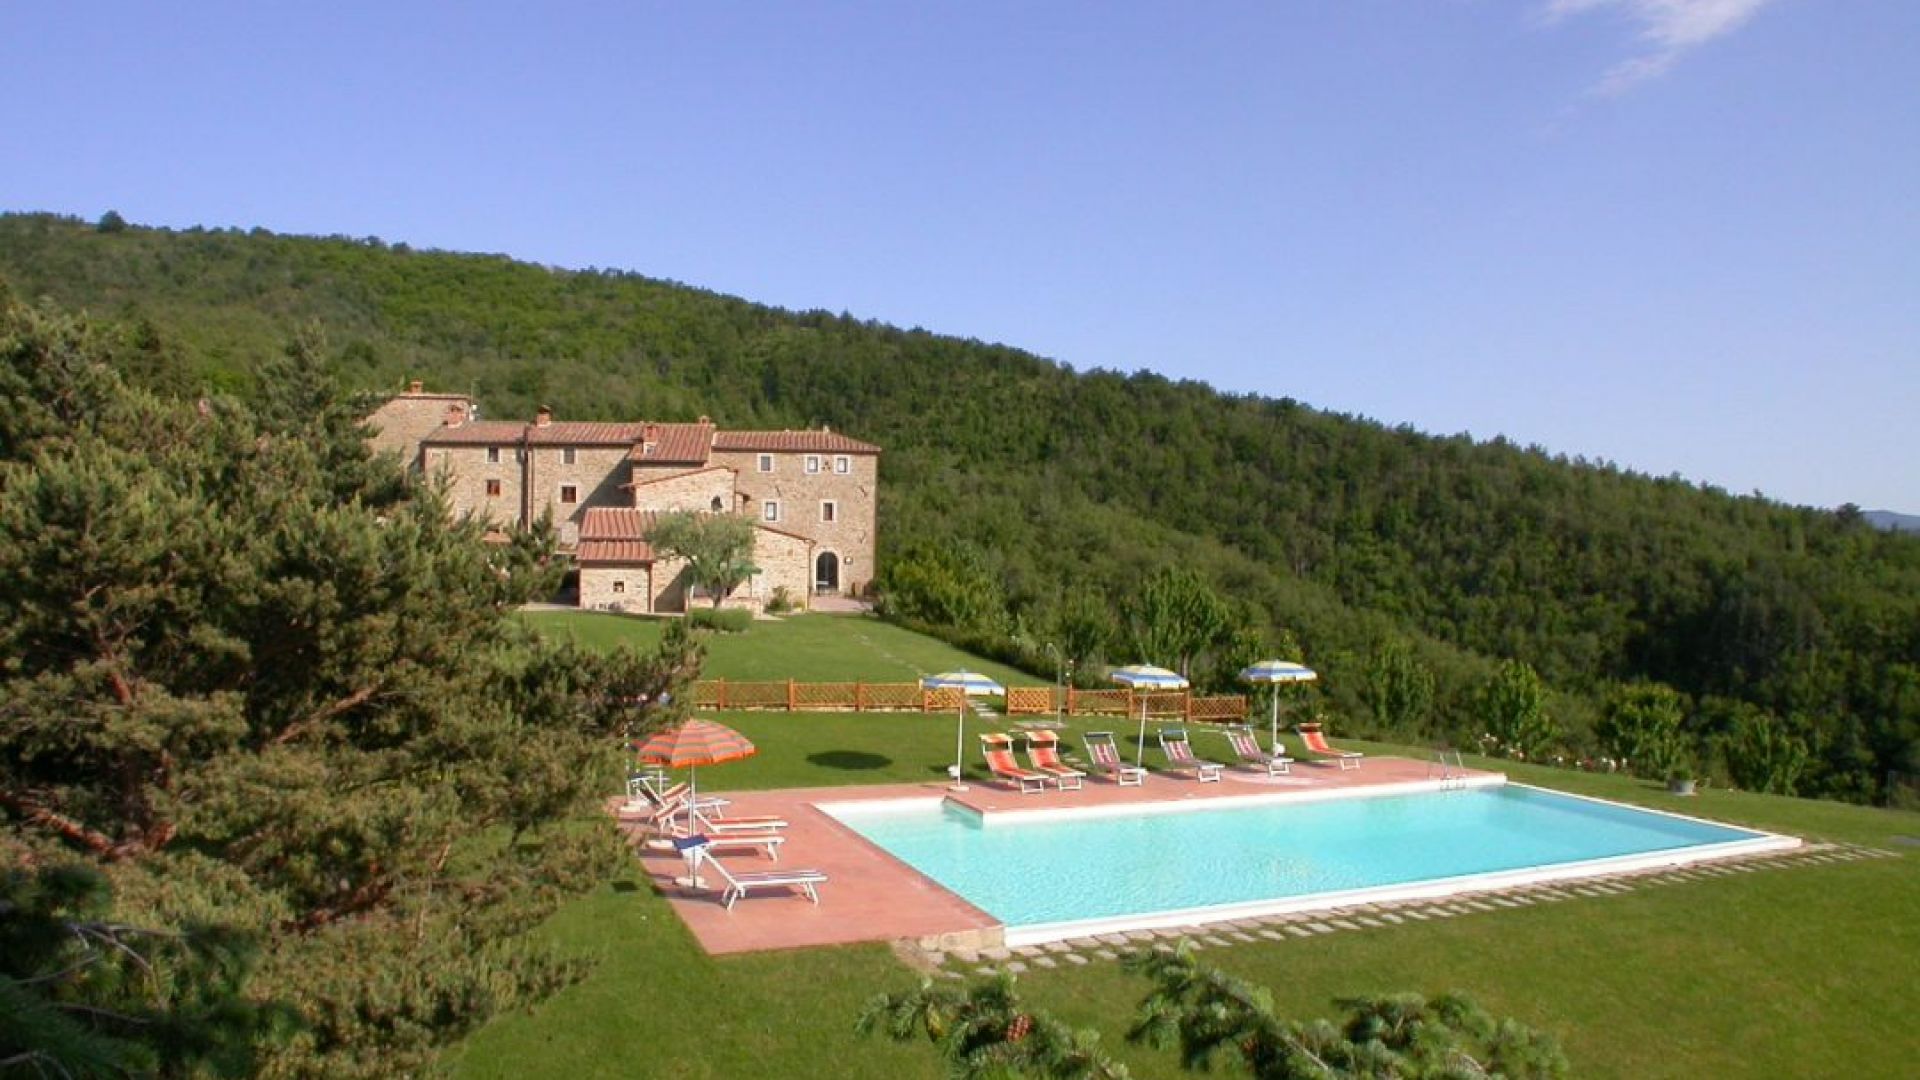 For sale cottage in  Arezzo Toscana